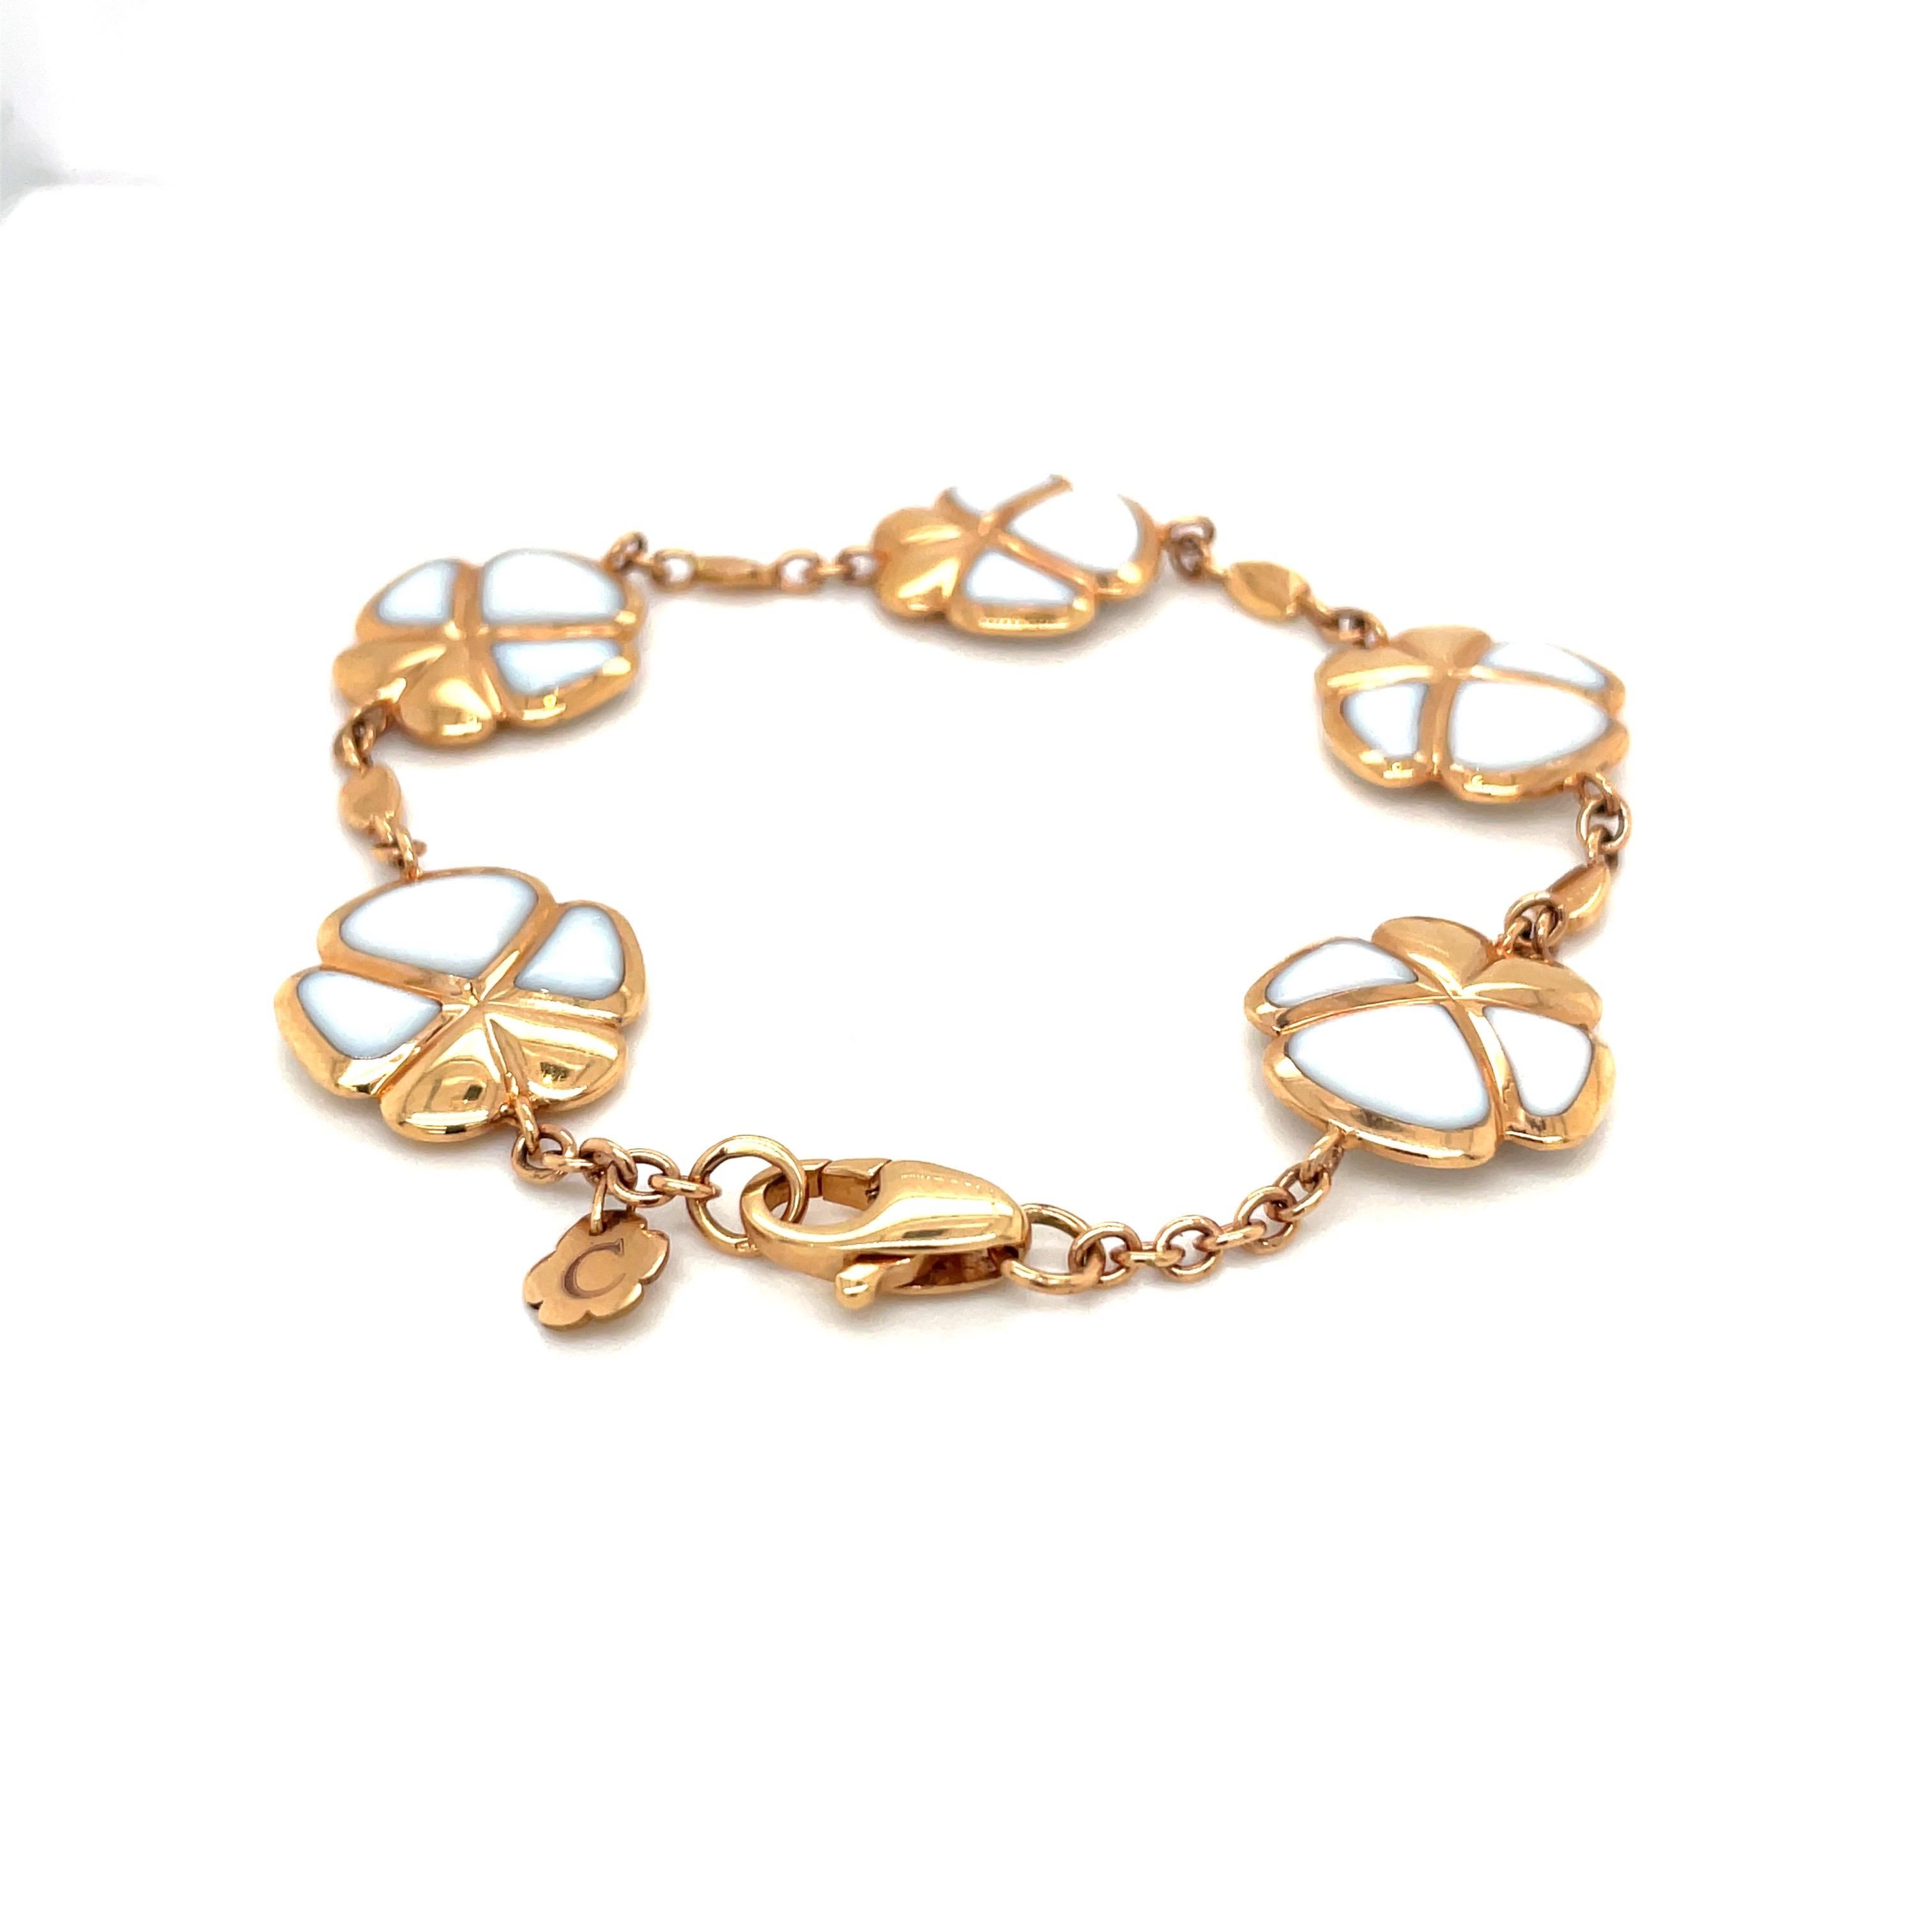 Created by famed Italian Jewelers, De AMBROSI, exclusively for Cellini Jewelers this flower bracelet is inlaid with white kogolong. As a show of the excellent craftsmanship the flowers are completely reversible, with the inlaid kogolong on both the